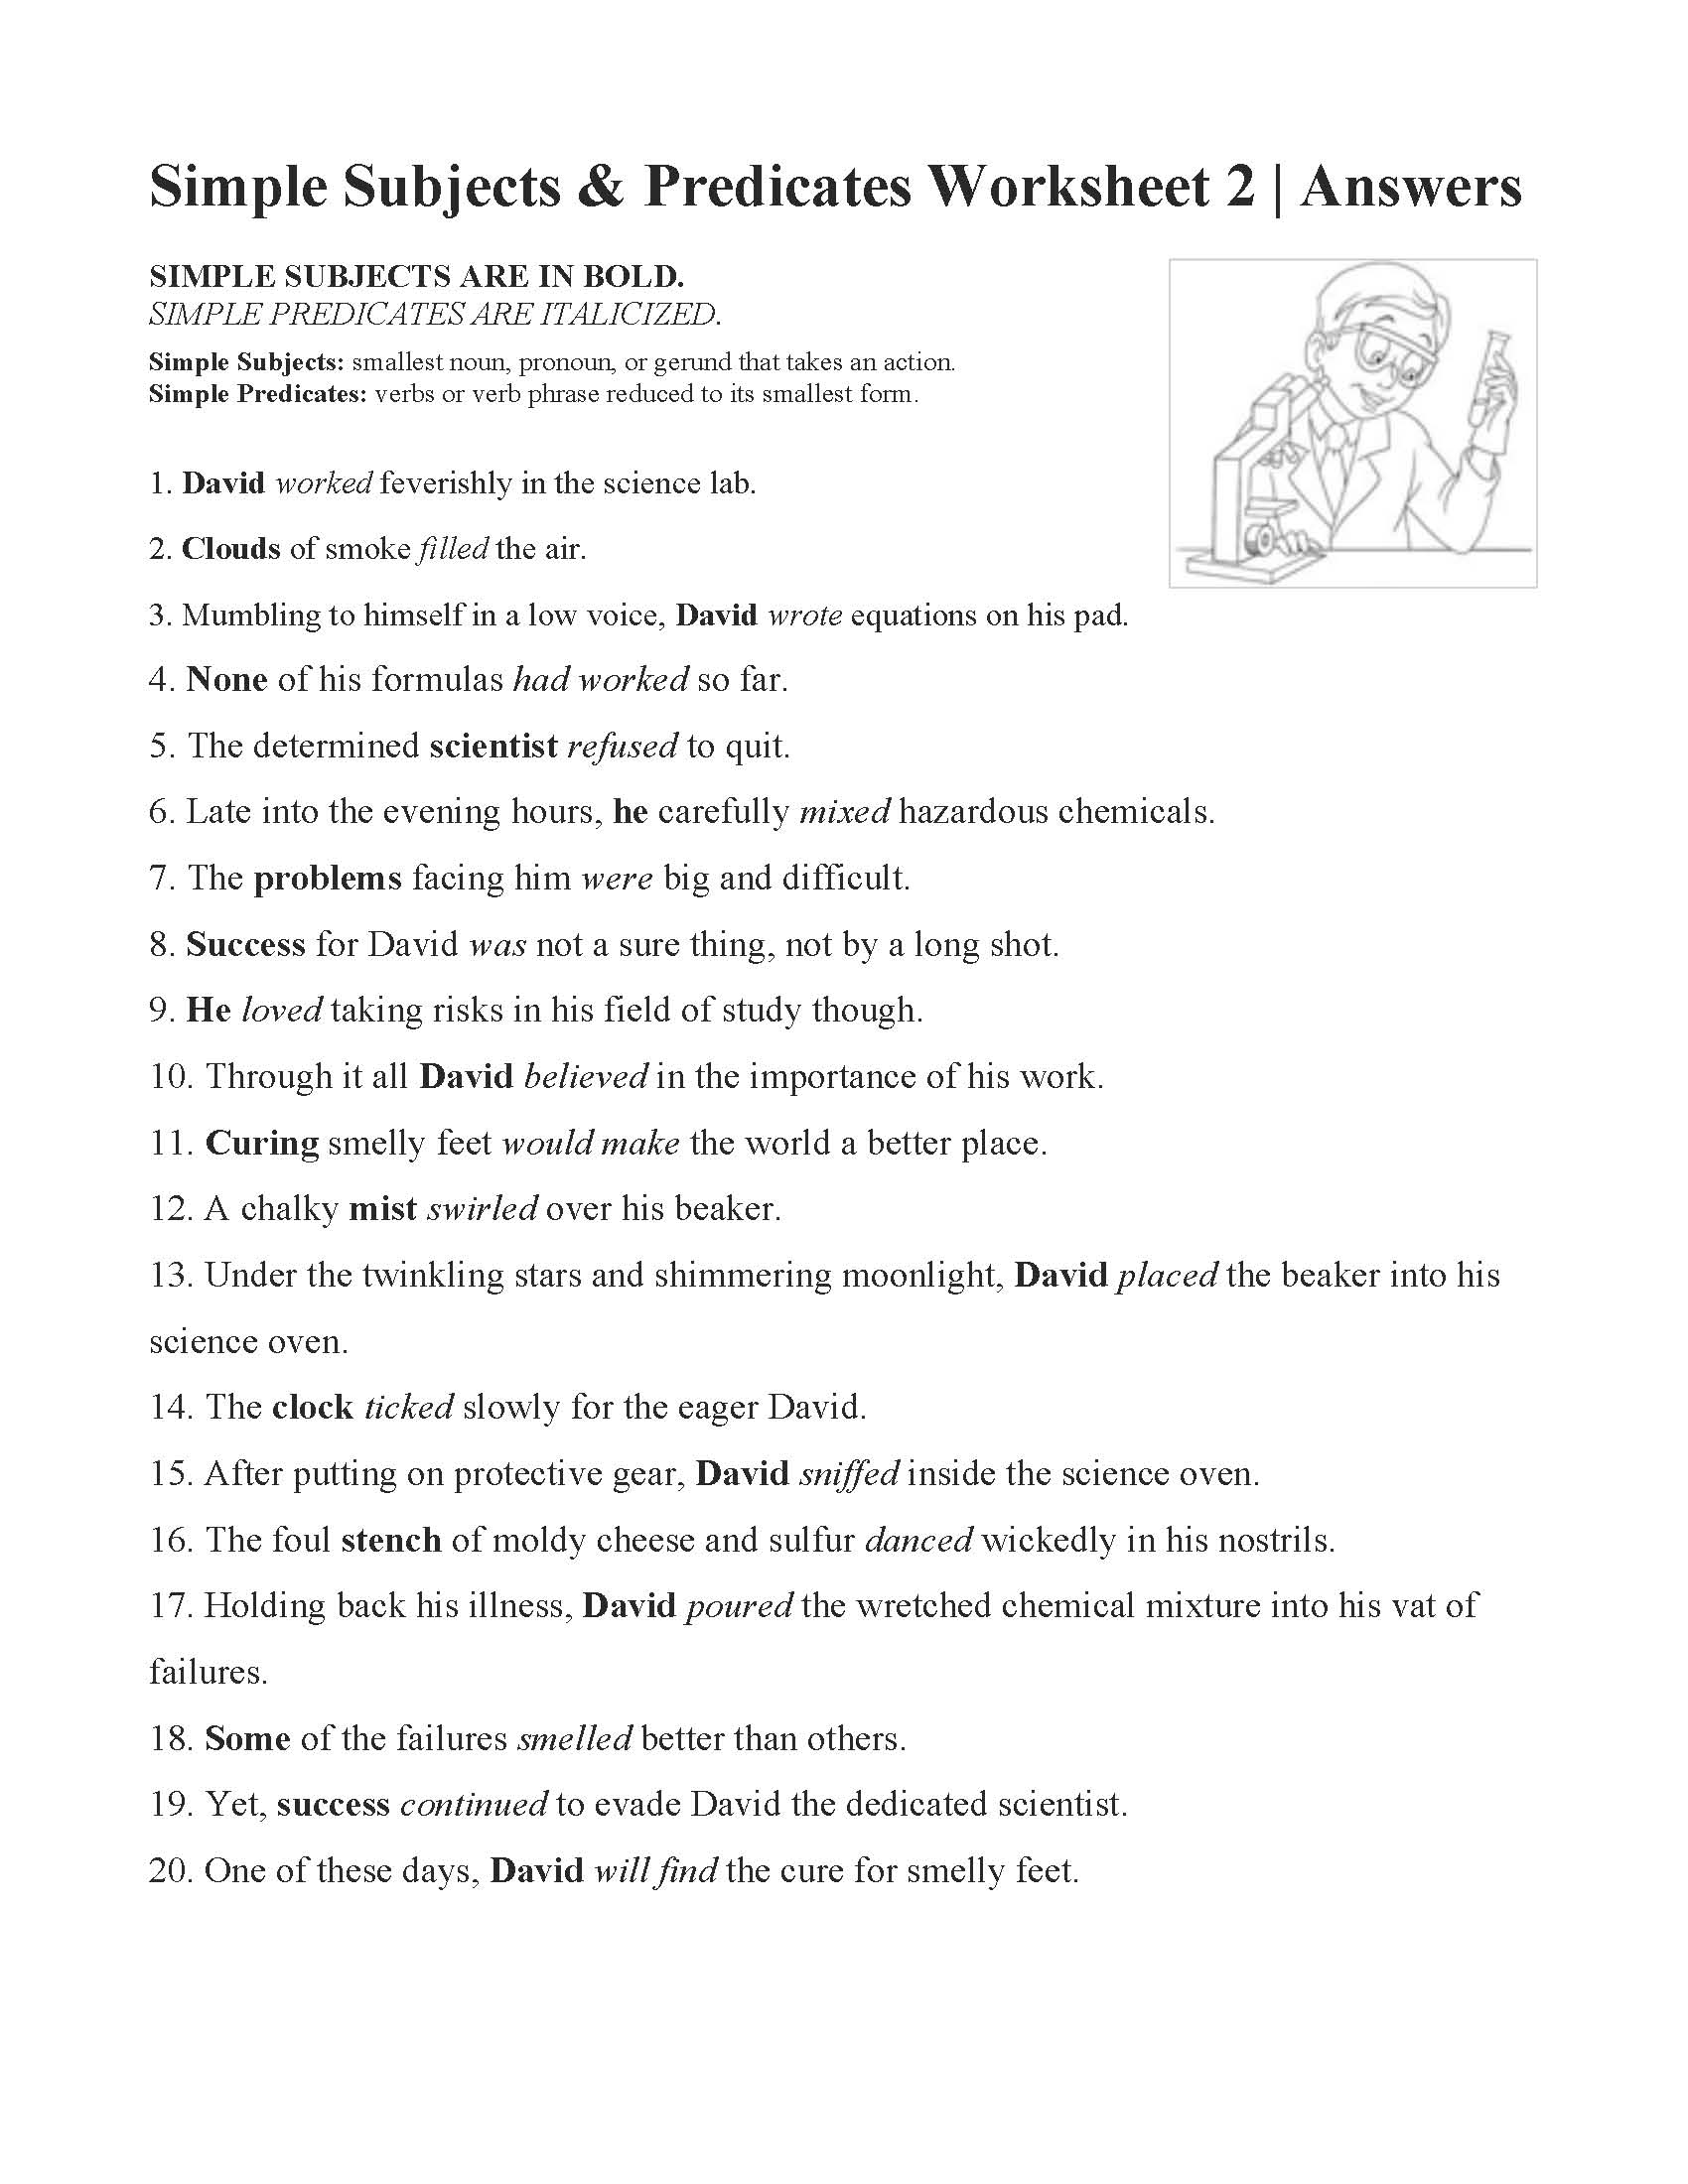 Simple Subjects And Predicates Worksheet 2 Answers